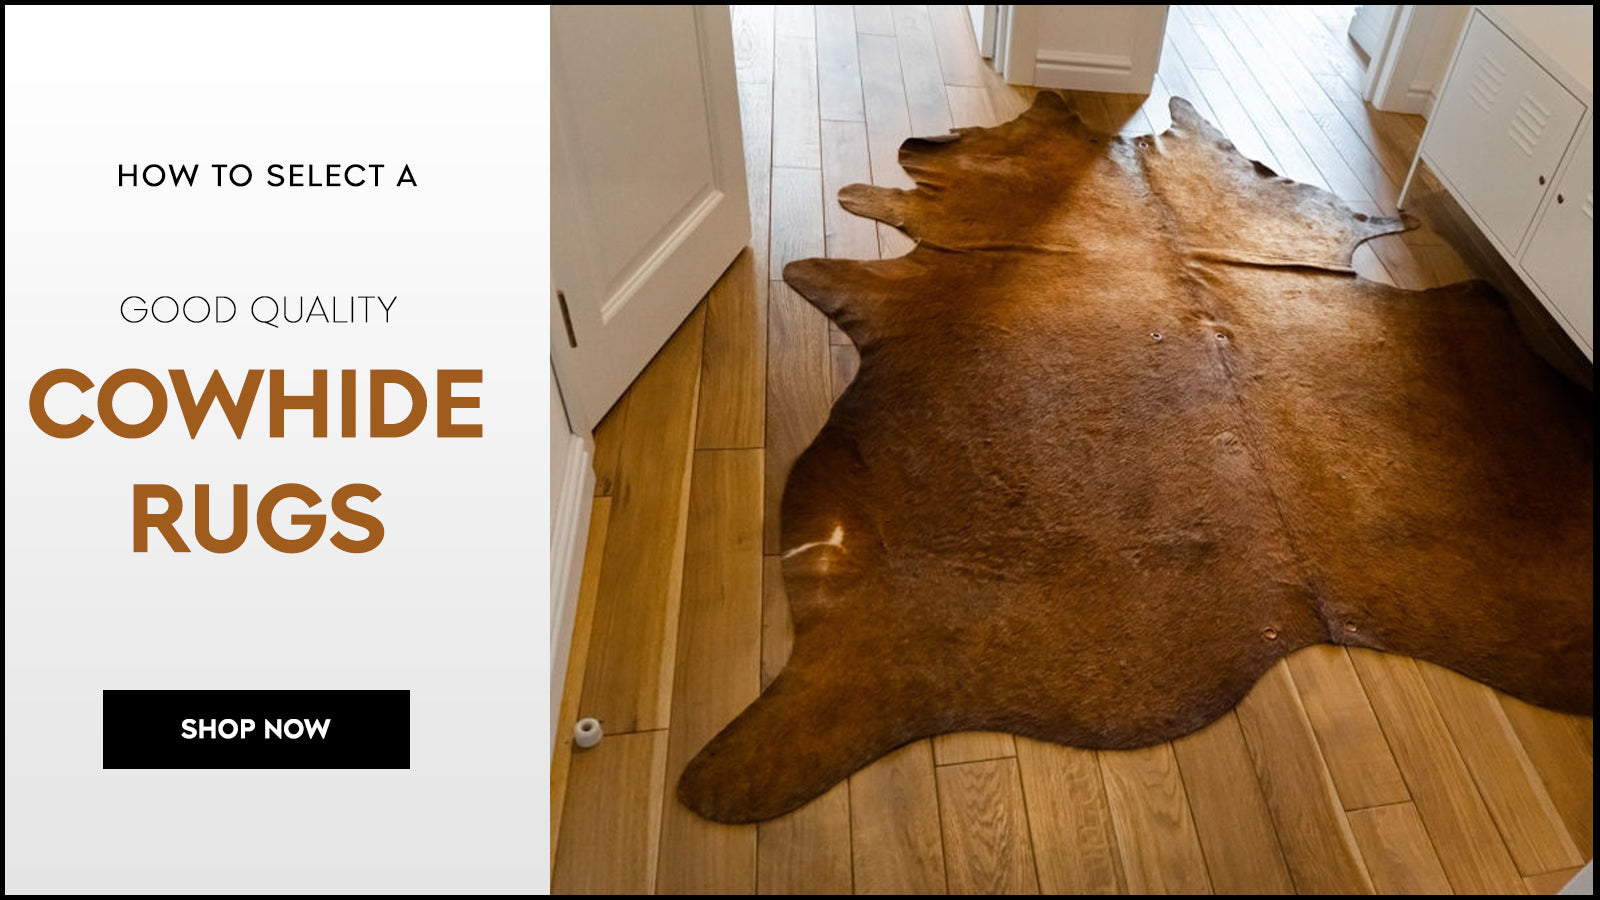 How To Select A Good Quality Cowhide Rug - RugKnots